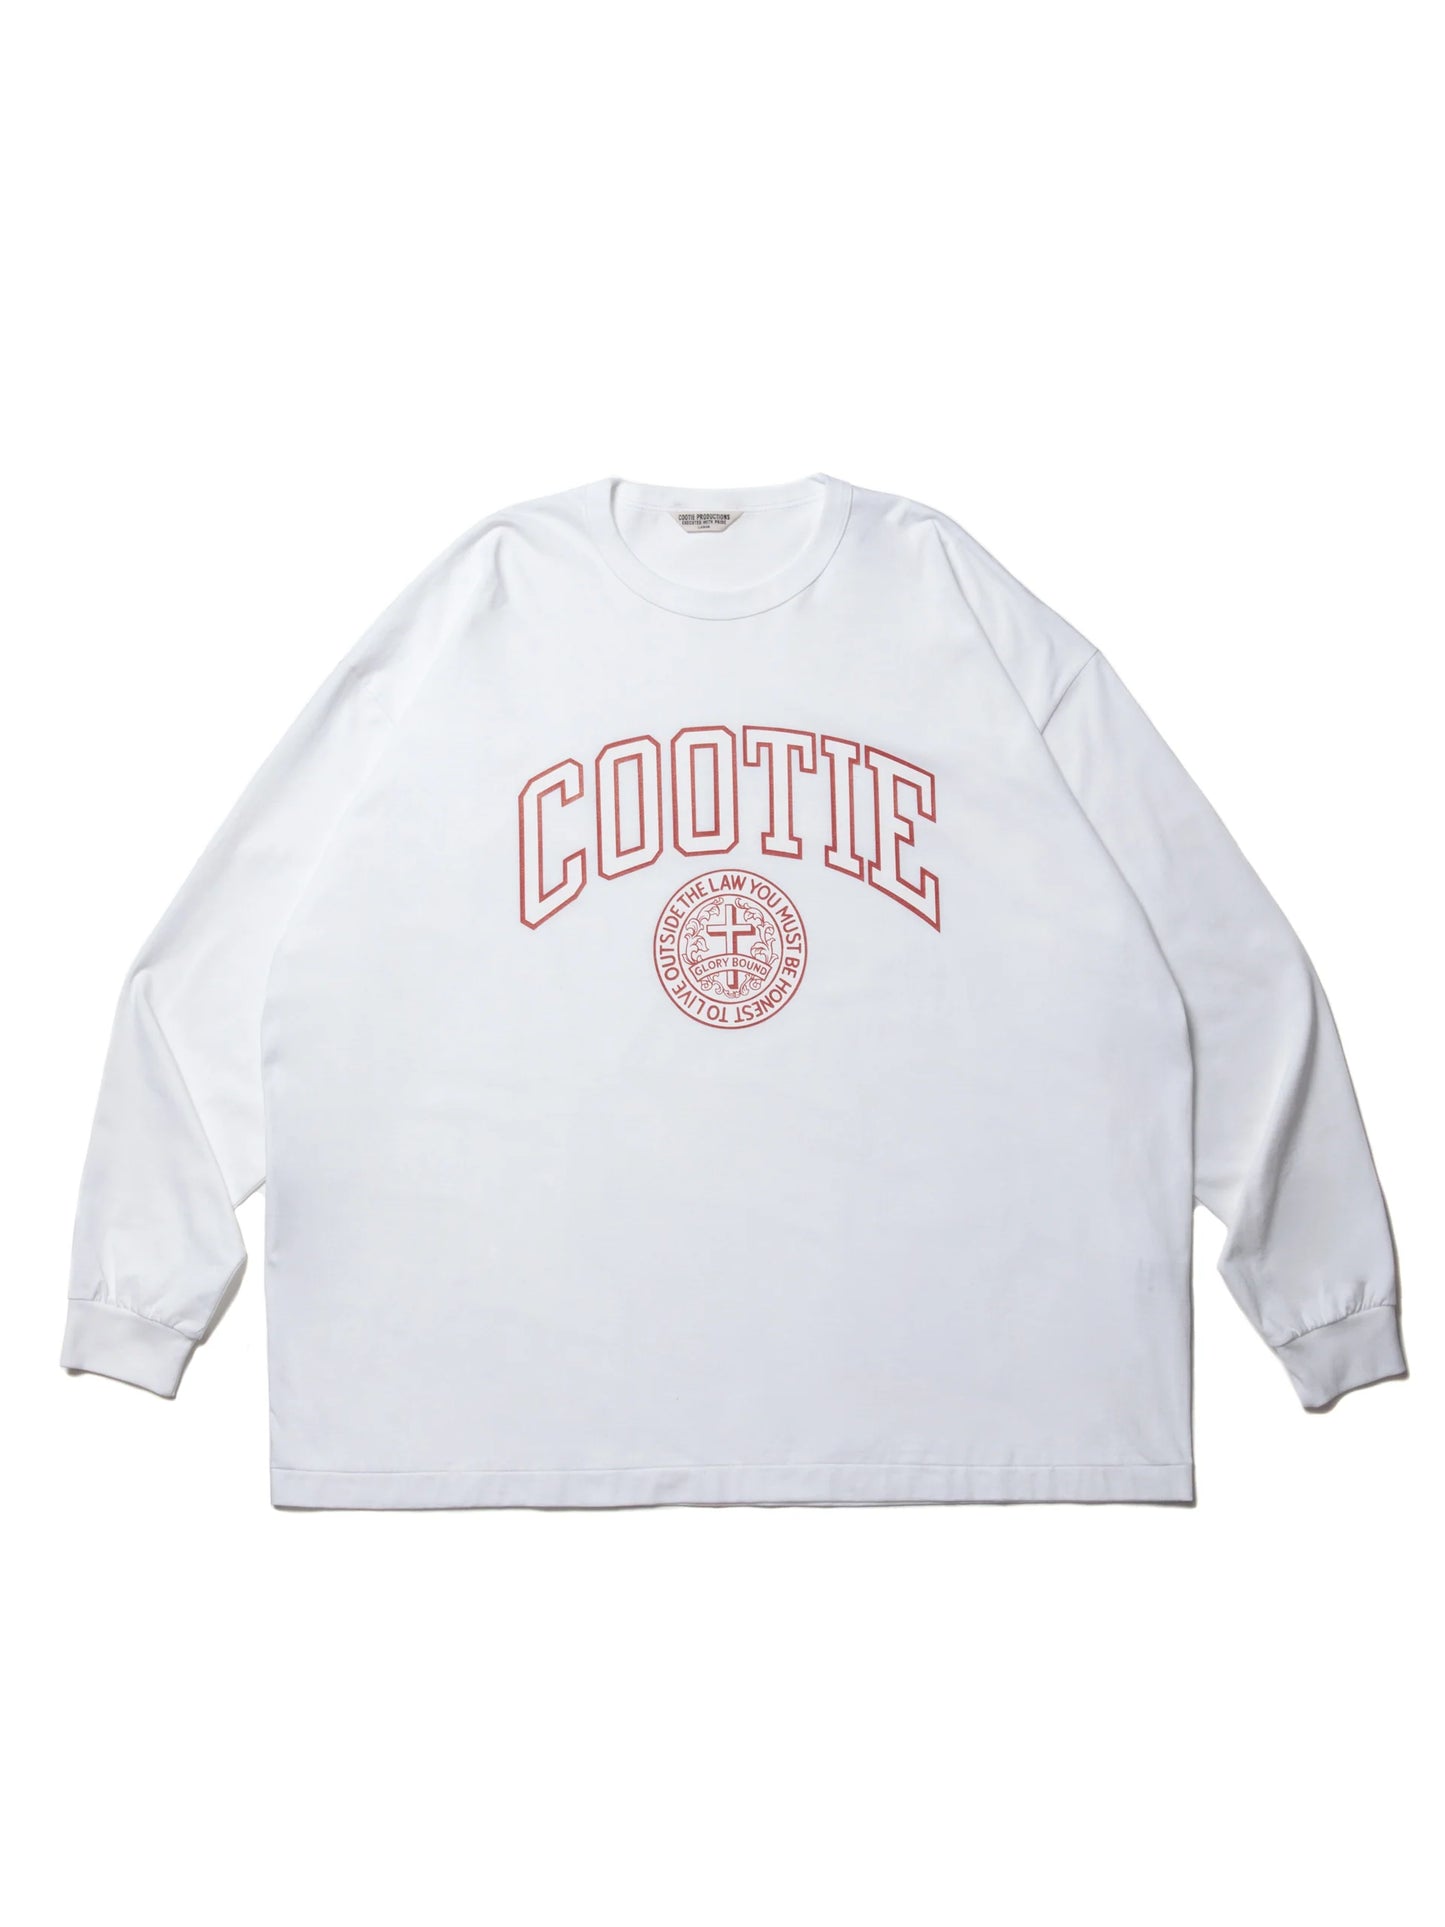 COOTIE PRODUCTIONS PRINT OVERSIZED L/S TEE (COLLEGE)